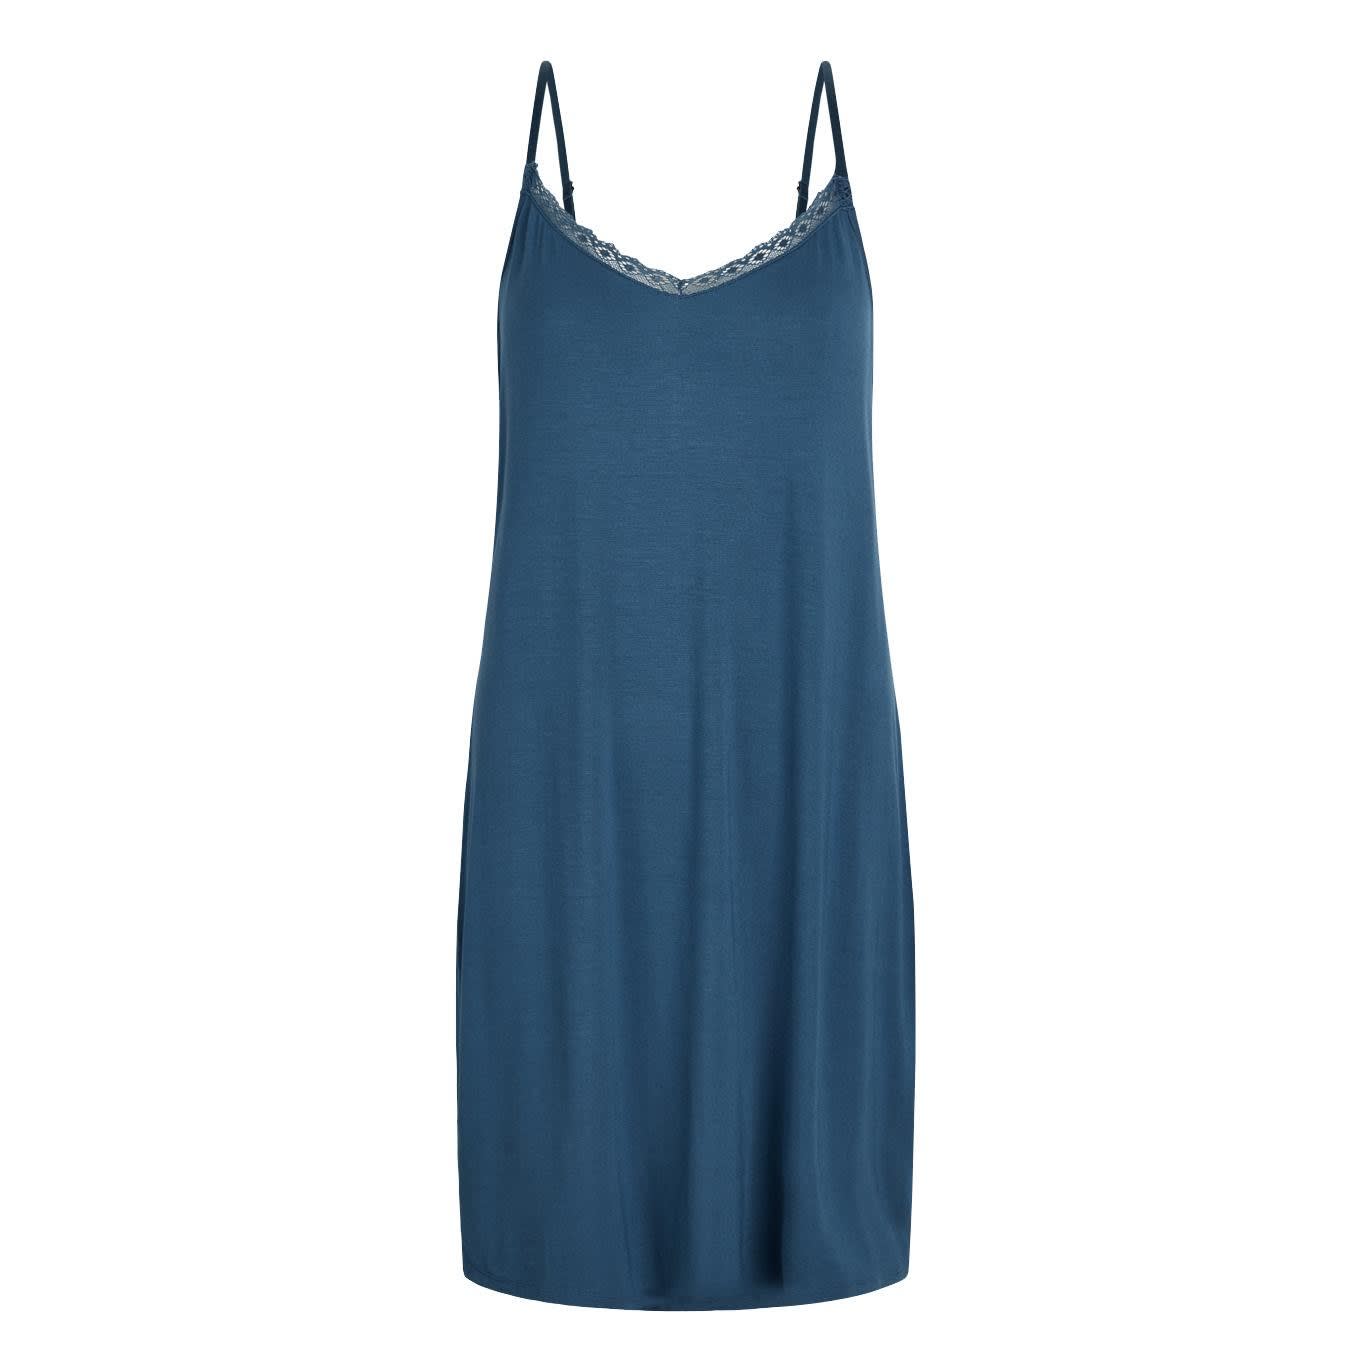 Maia Bamboo Chemise Dress, ensign blue